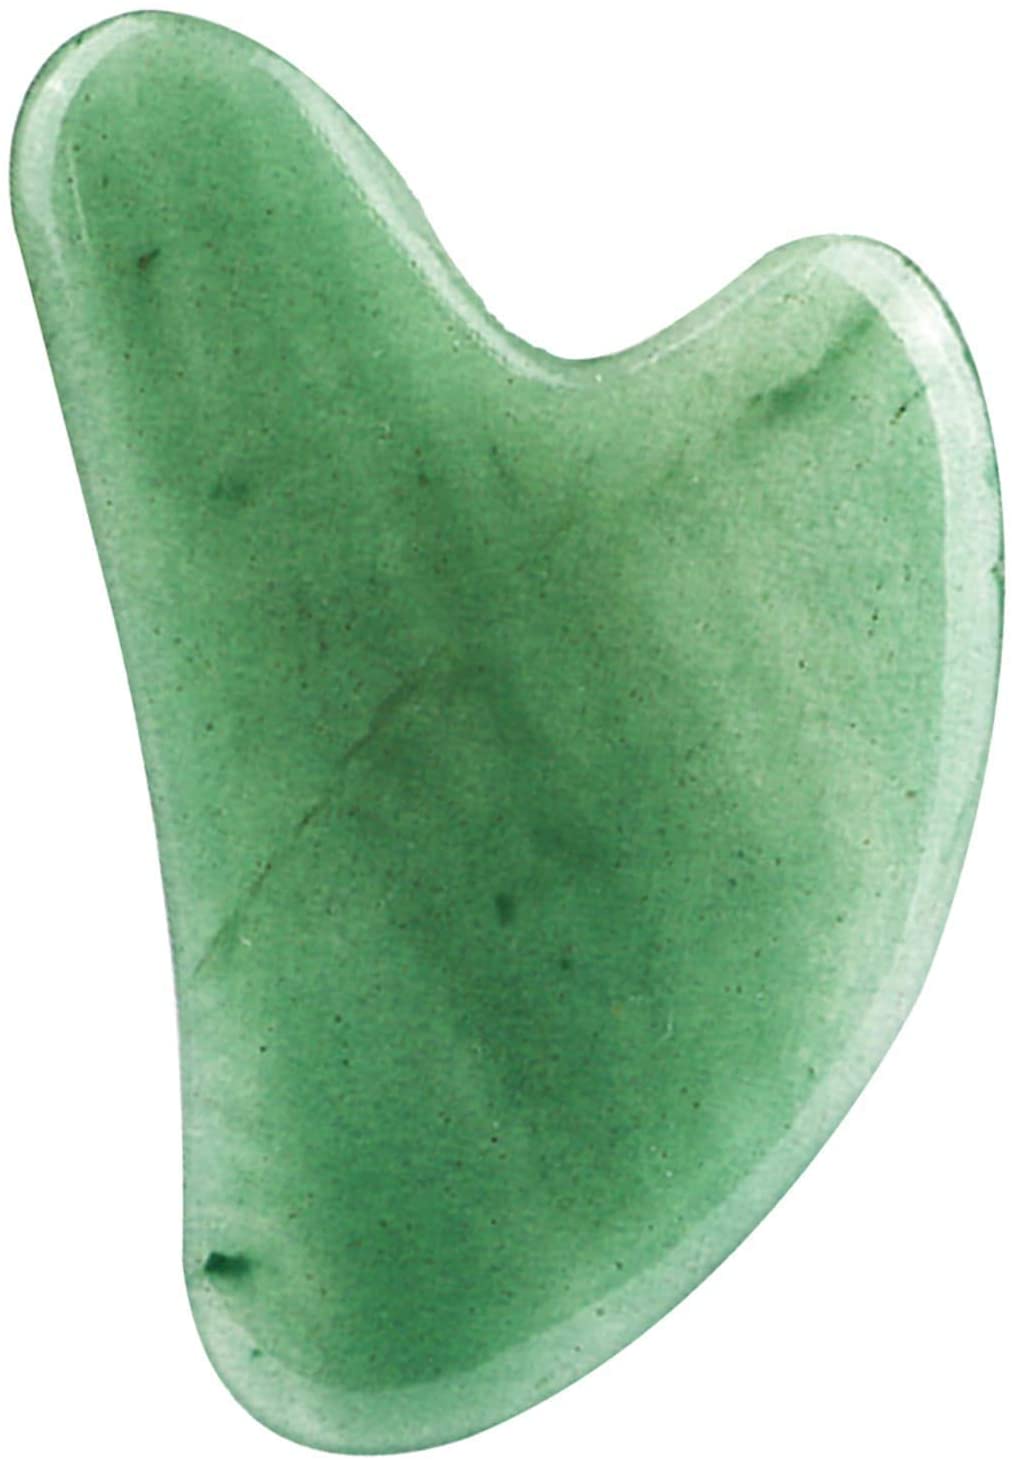 Large Gua Sha Heart Natural Jade Stone for Face to Lift, Decrease Puffiness and Tighten - Hyshina